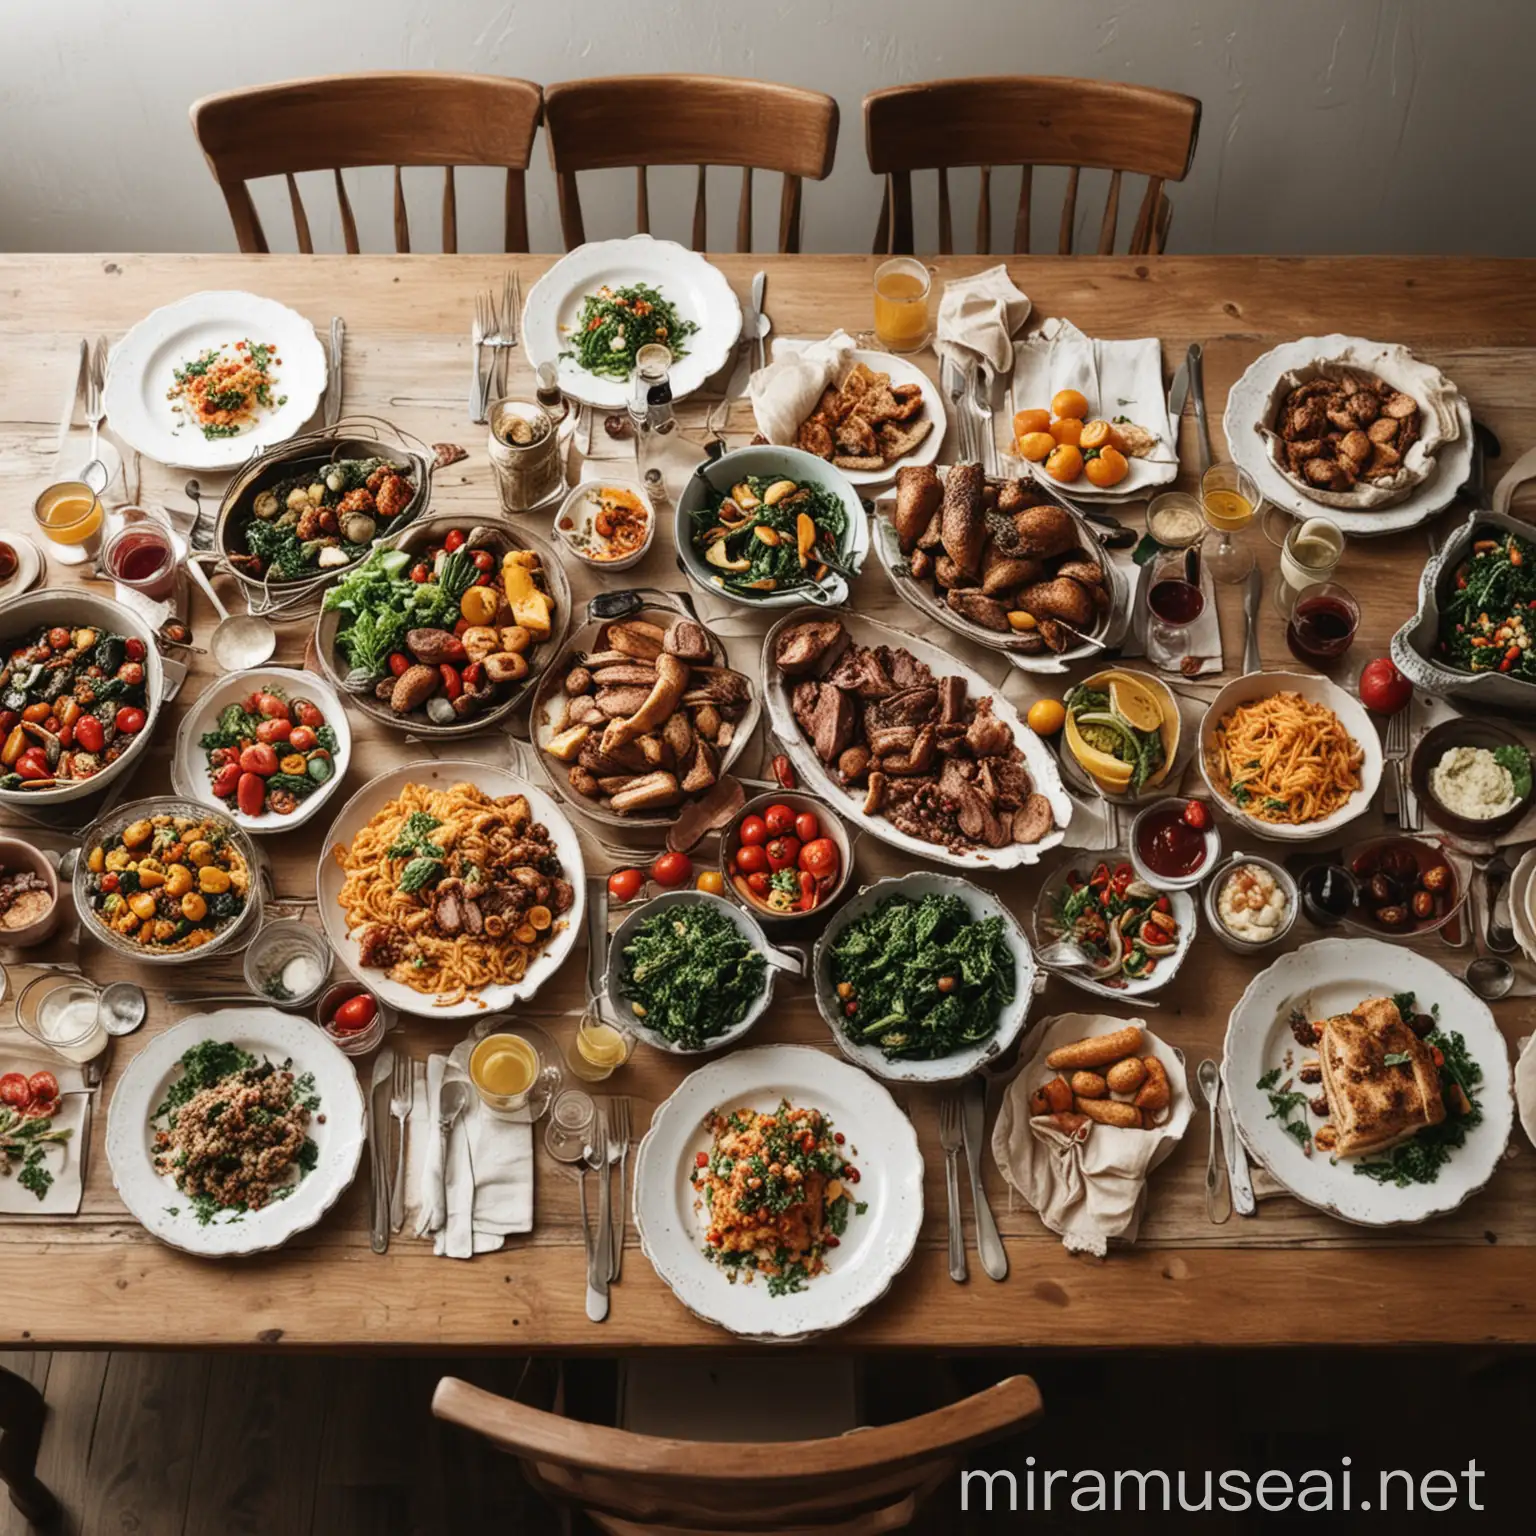 Variety of Delicious Food Spread on the Table